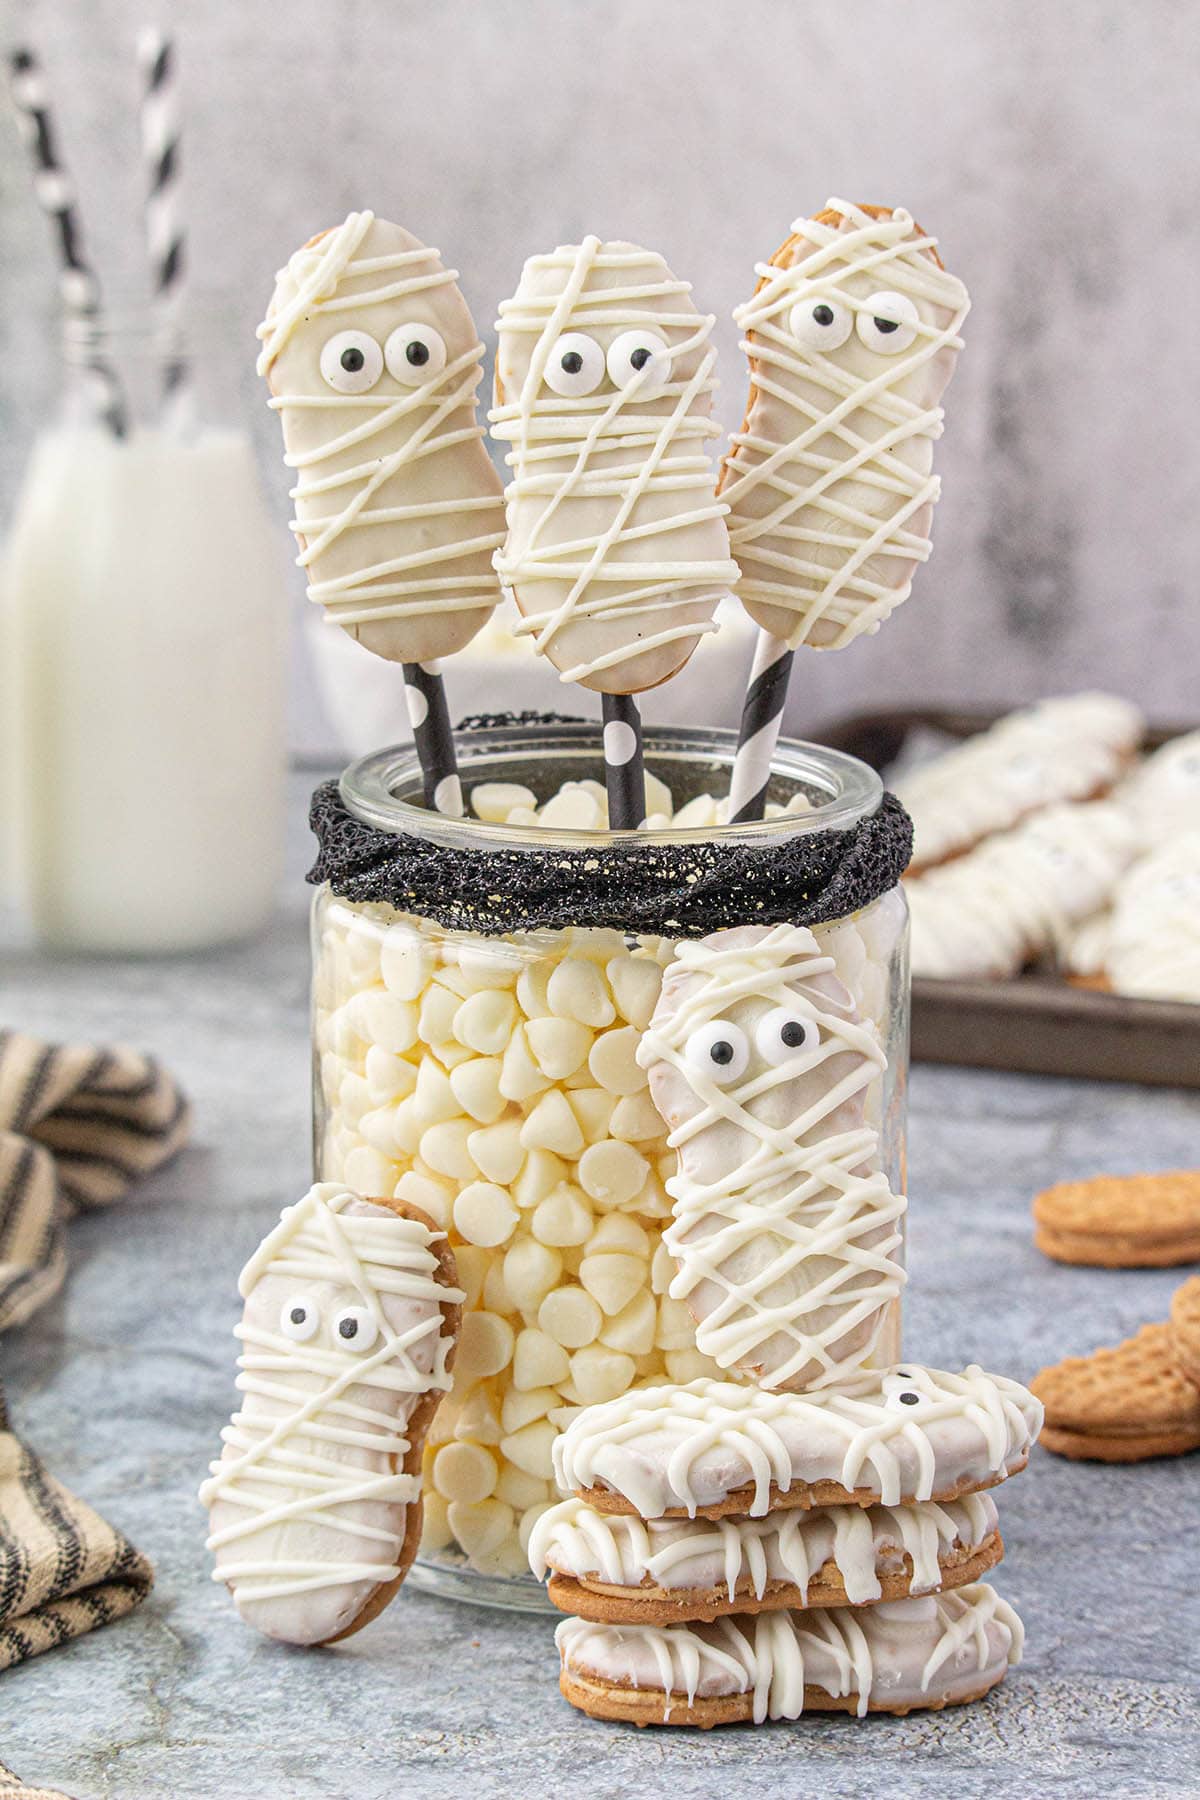 A stack of Nutter Butter Cookies decorated to look like mummies for Halloween.